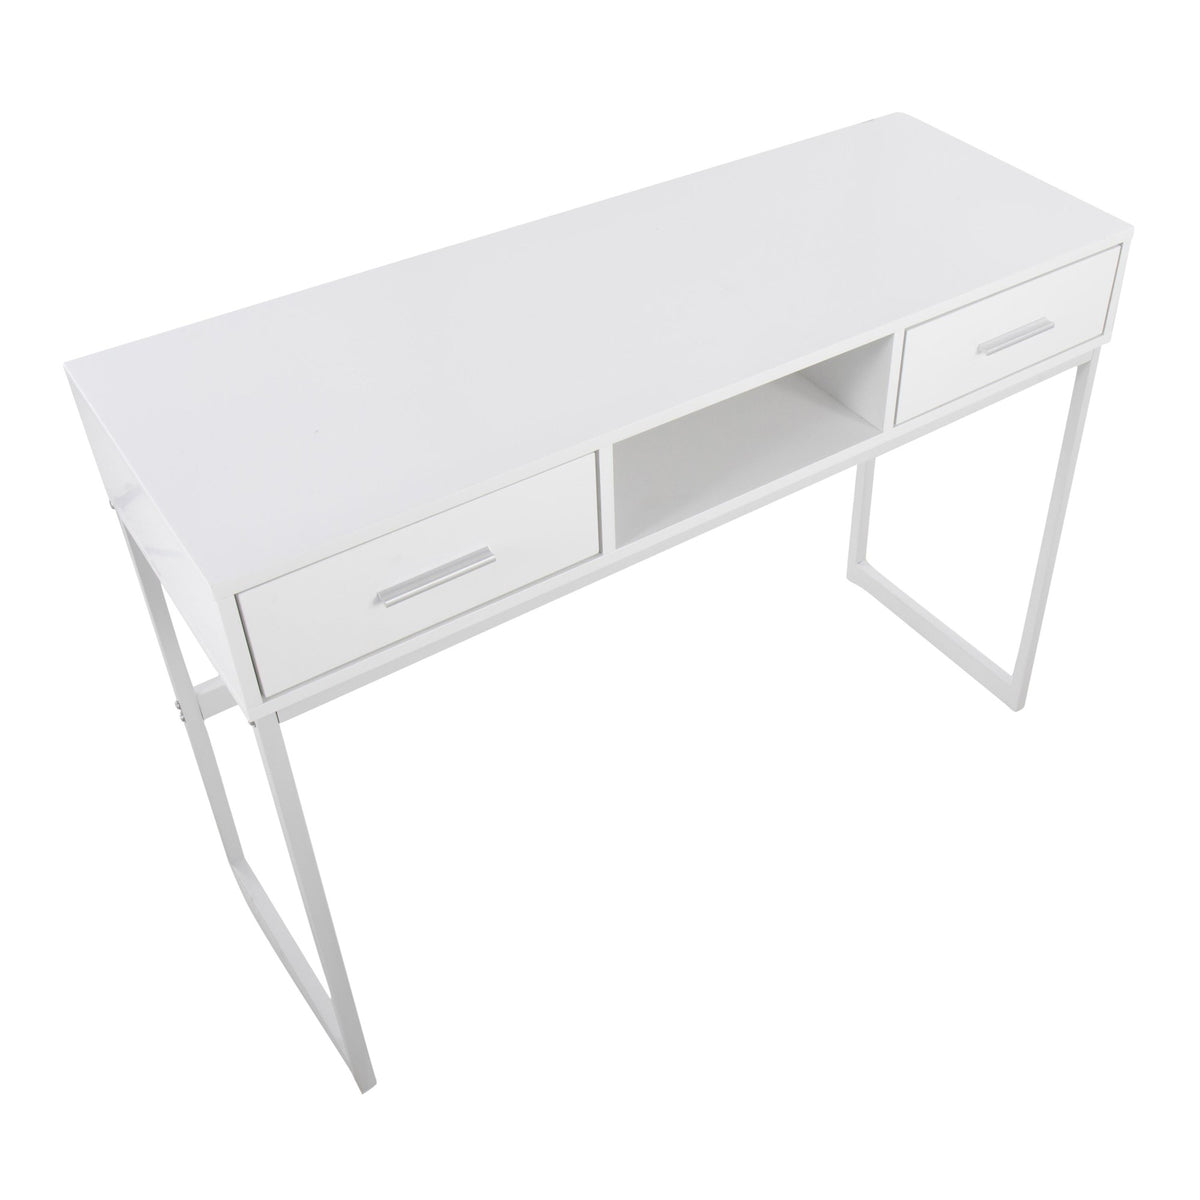 LUMISOURCE FRANKLIN CONSOLE TABLE